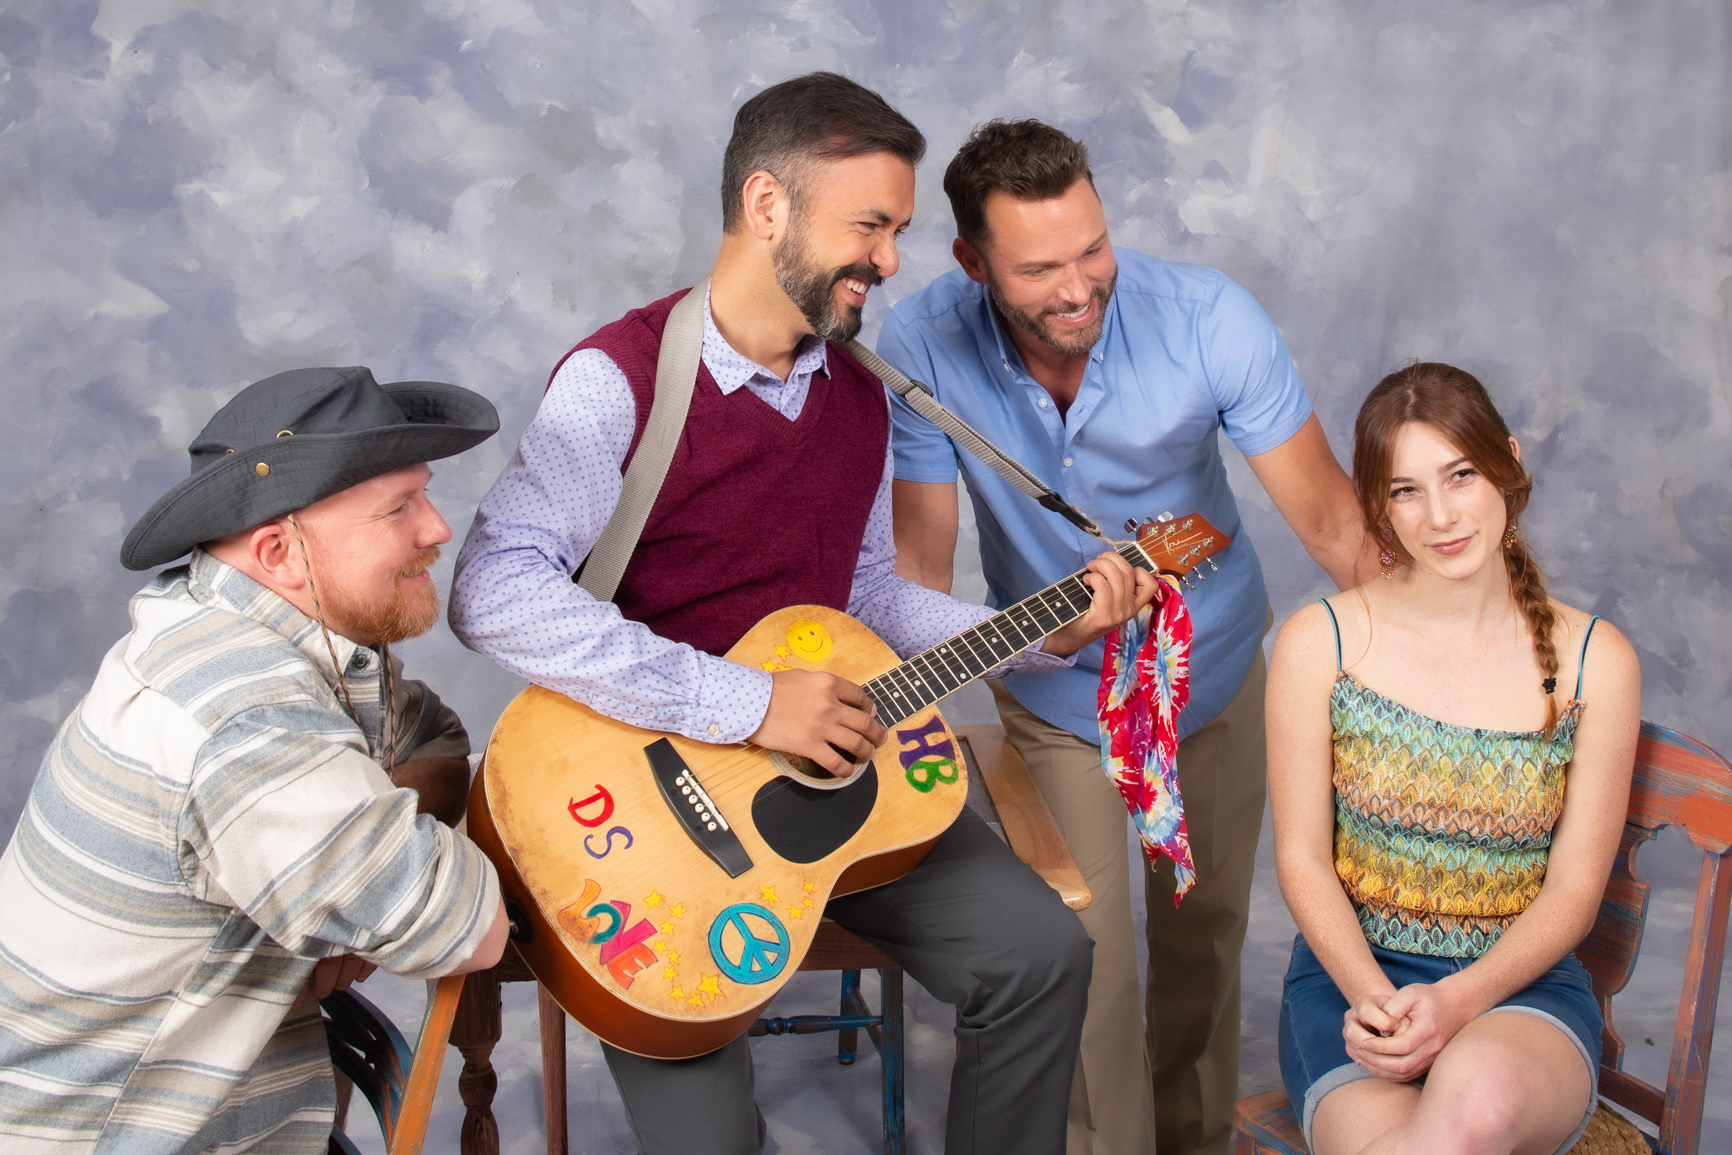 Jeremy Saje as “Bill”, Brayden Hade as “Harry”, Eric Martsolf as “Sam”, and Nicolette Norgaard as 